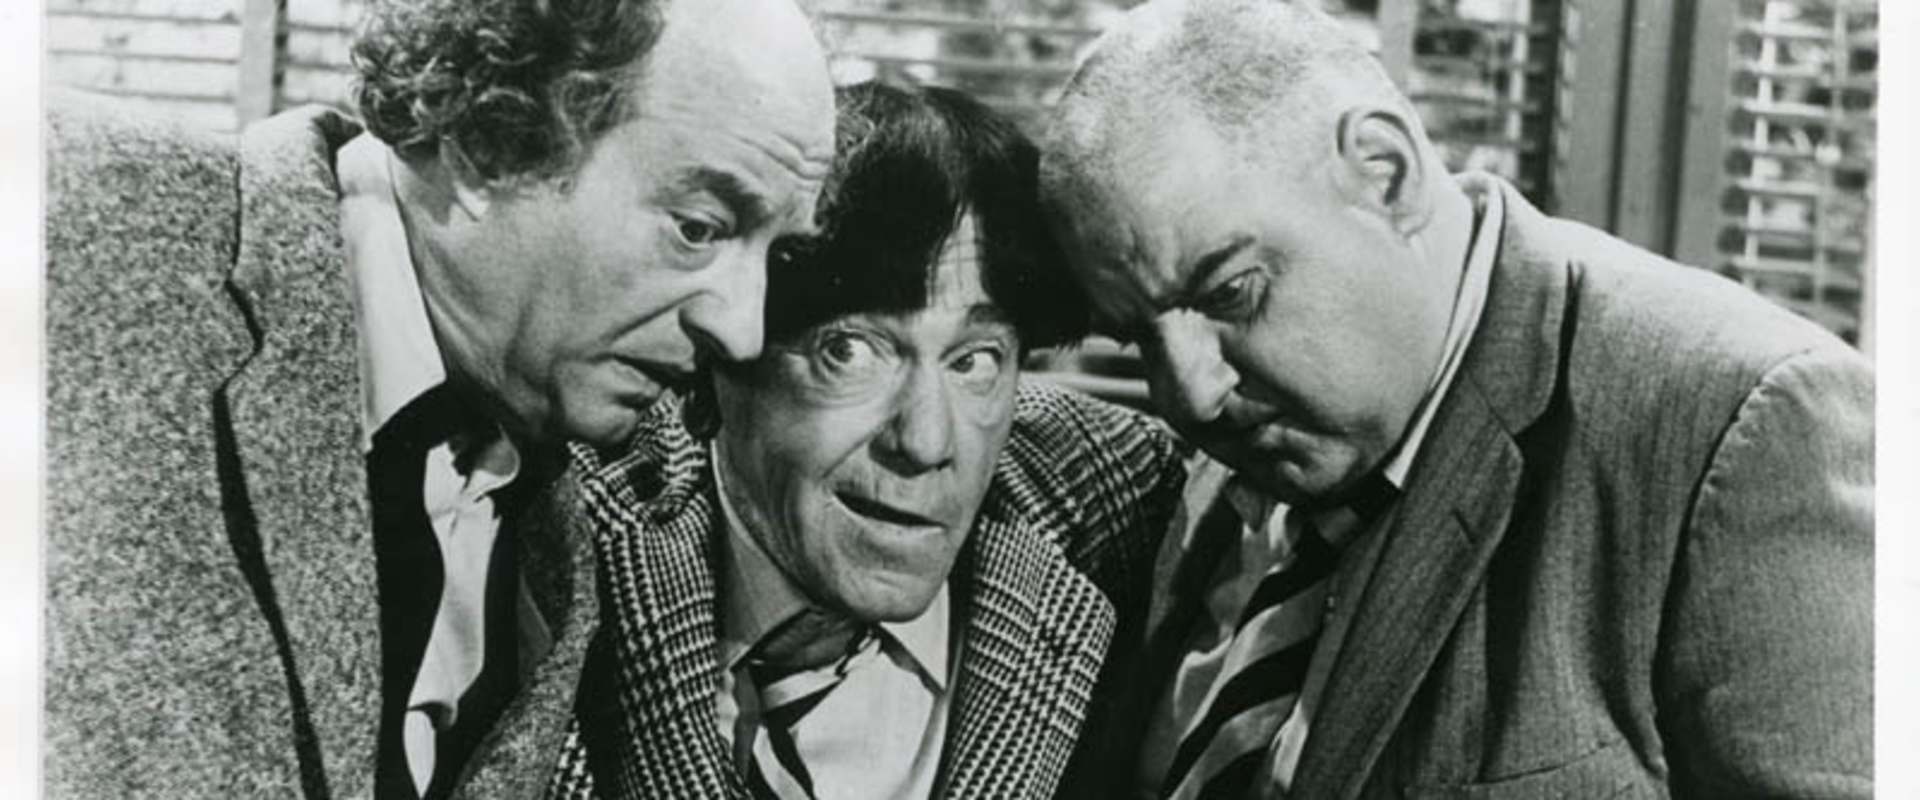 The Three Stooges Go Around the World in a Daze background 2